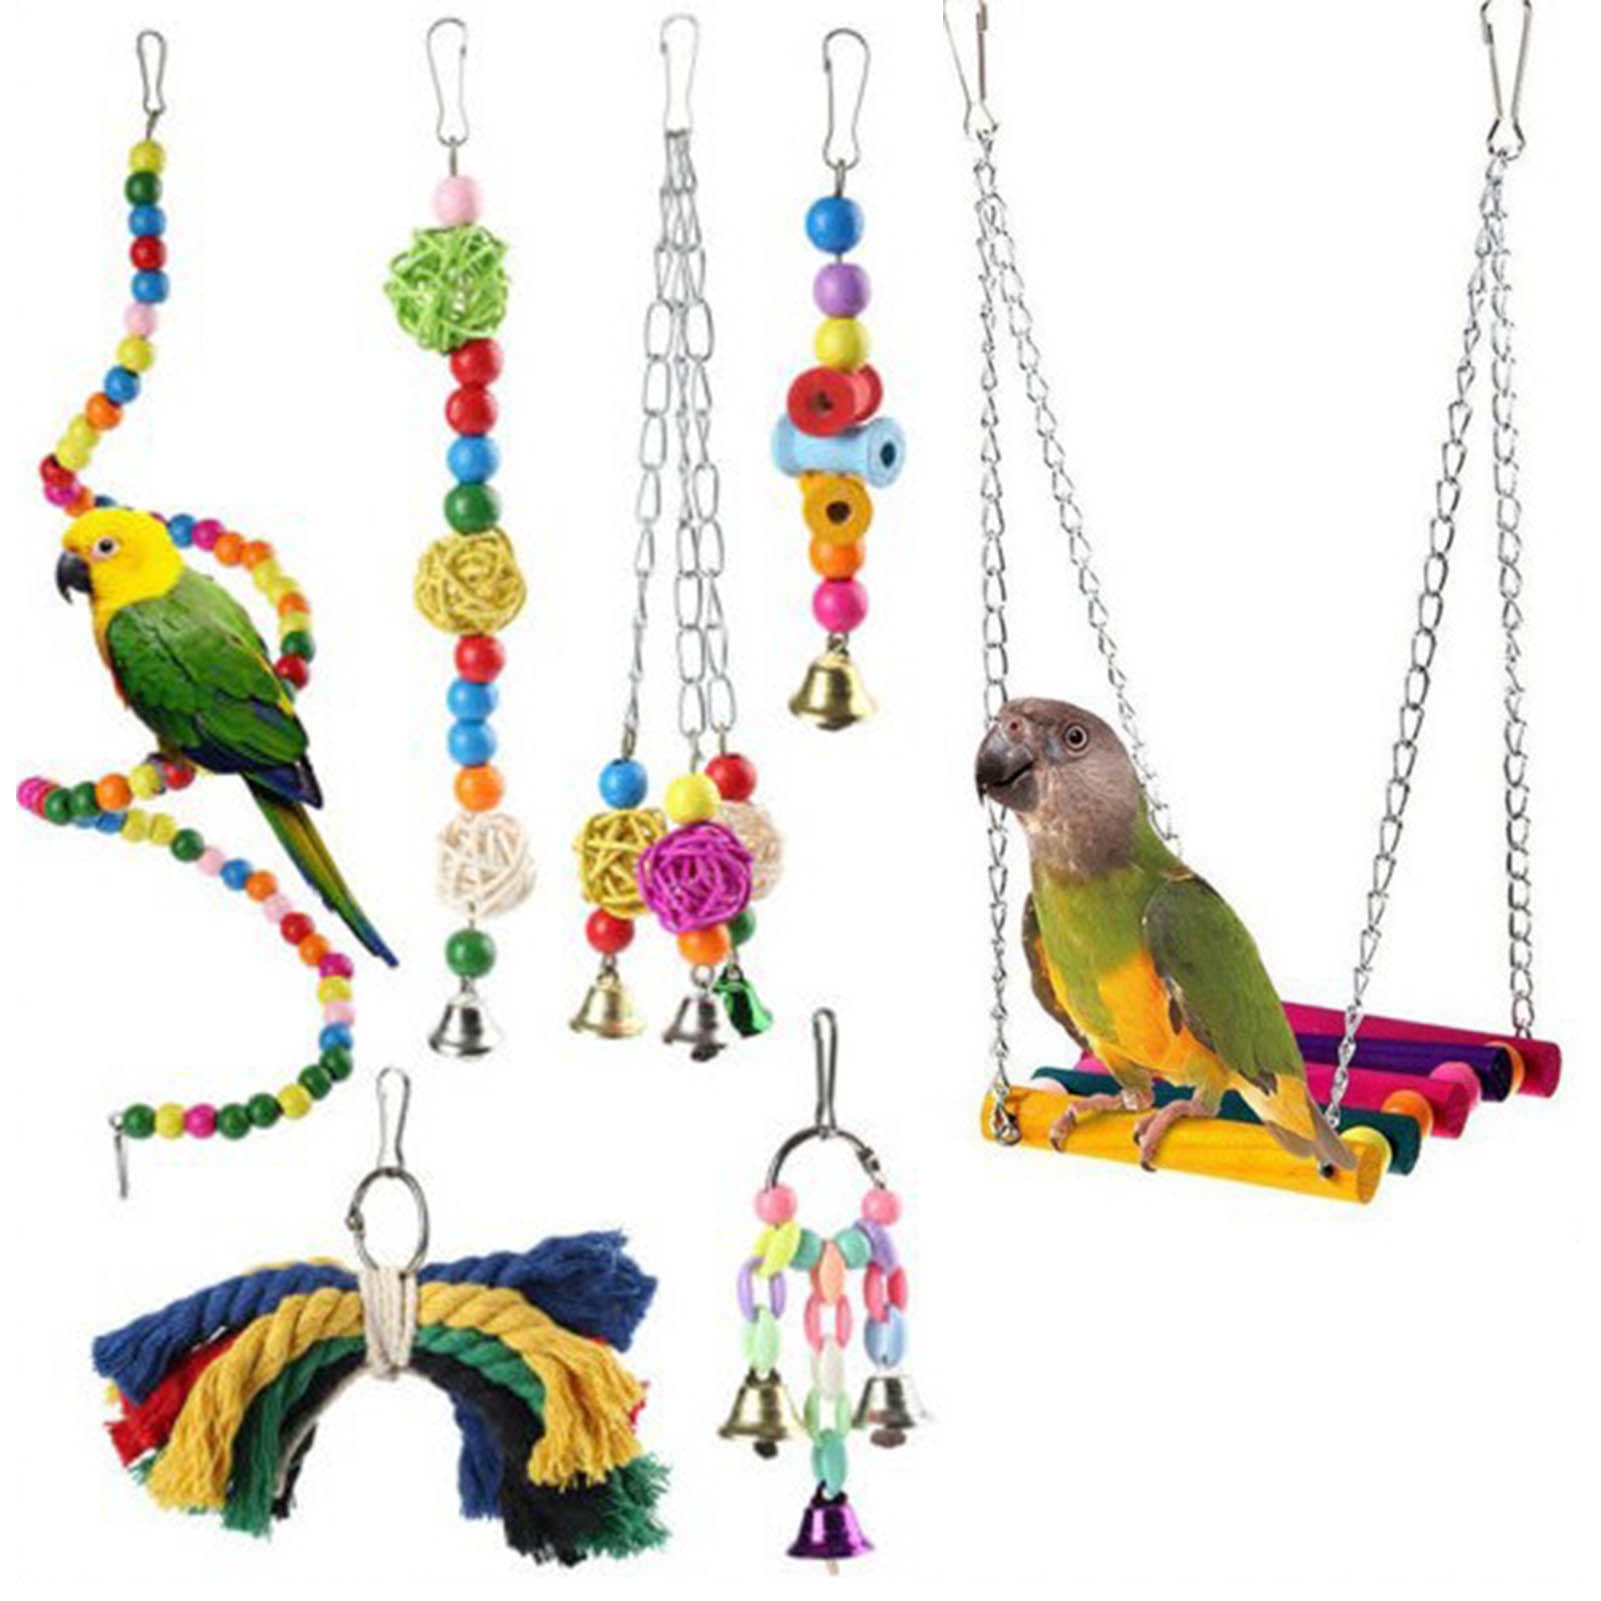 Toy Pet Bu D1F6 Wooden Mini Round Parrot Bird Cage Perches Stand Platform Gifts 